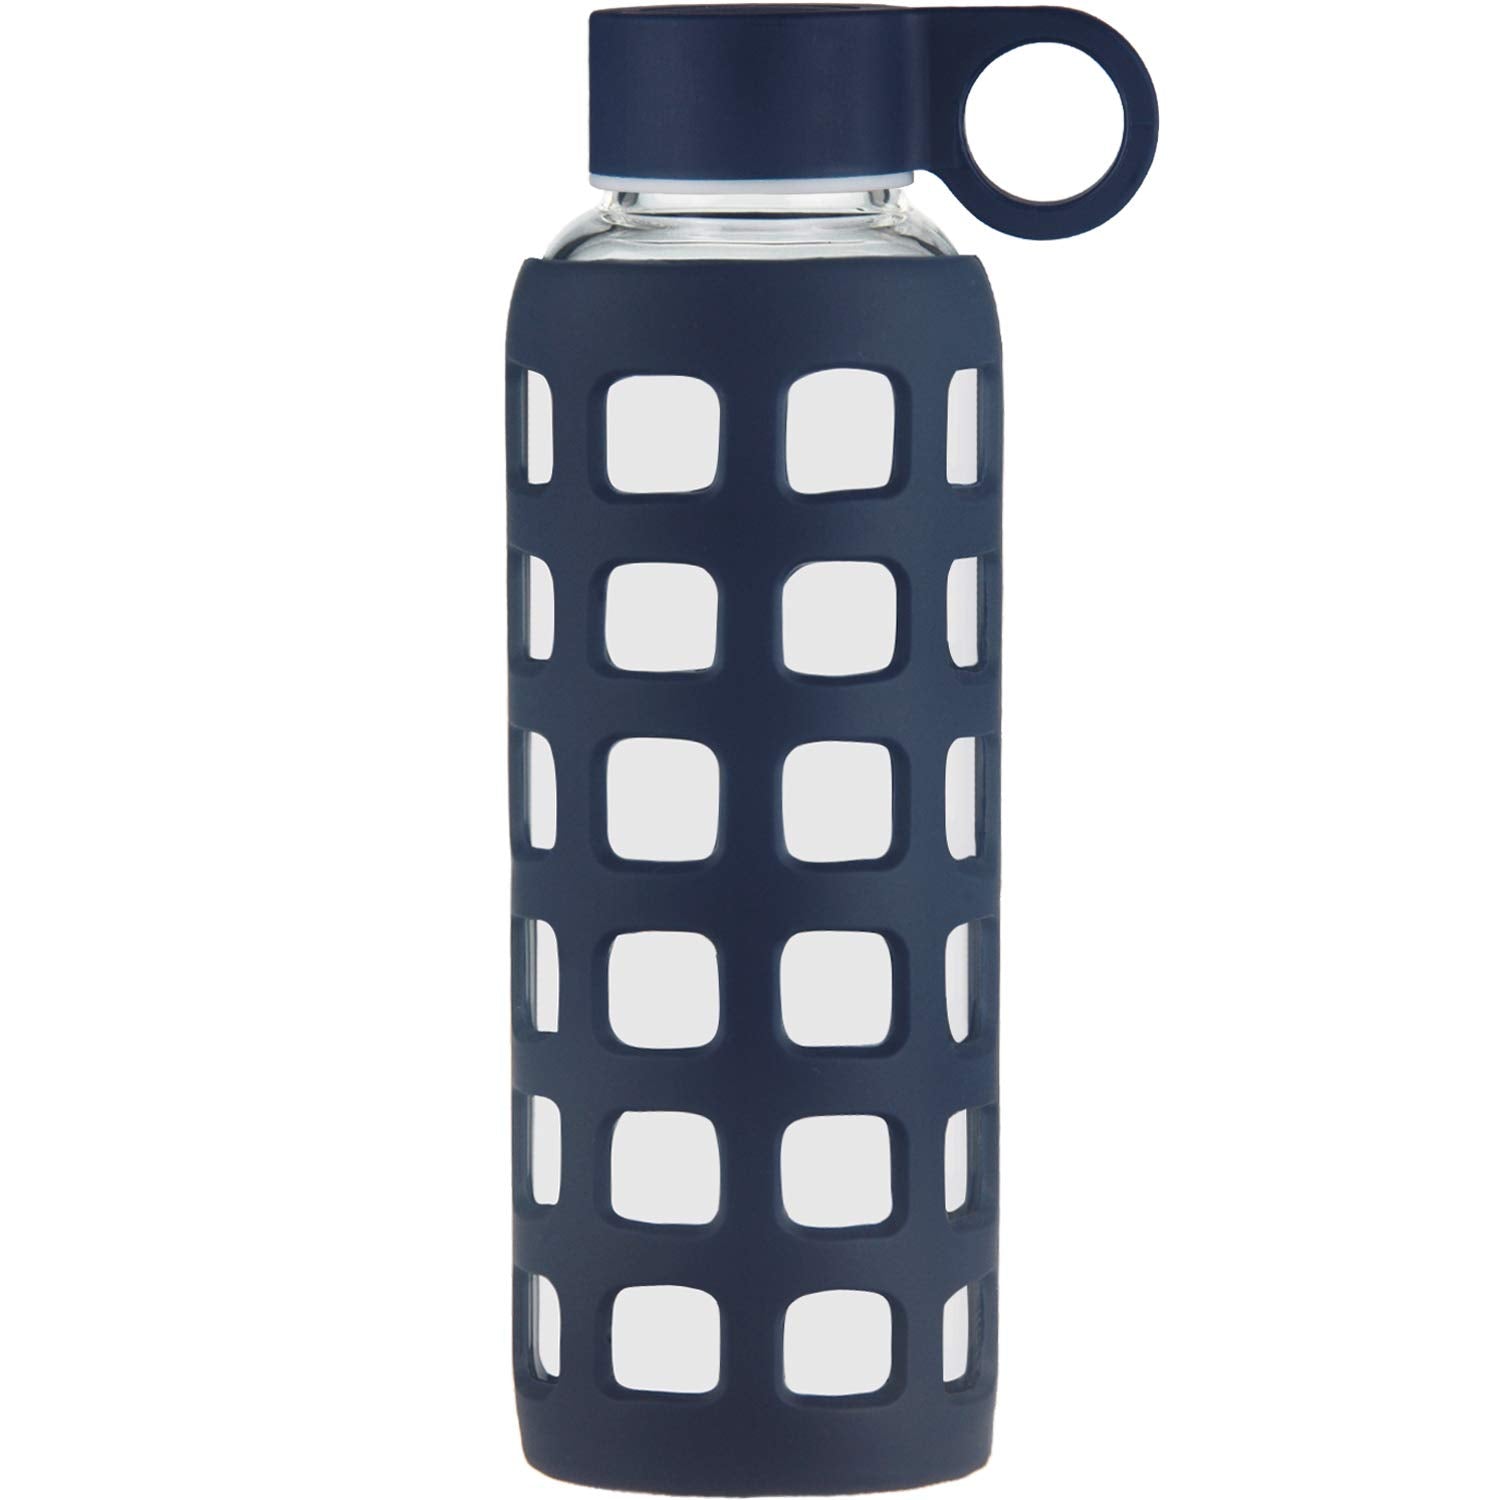 32 Glass Water Bottle With Silicone Sleeve, Reusable Borosilicate